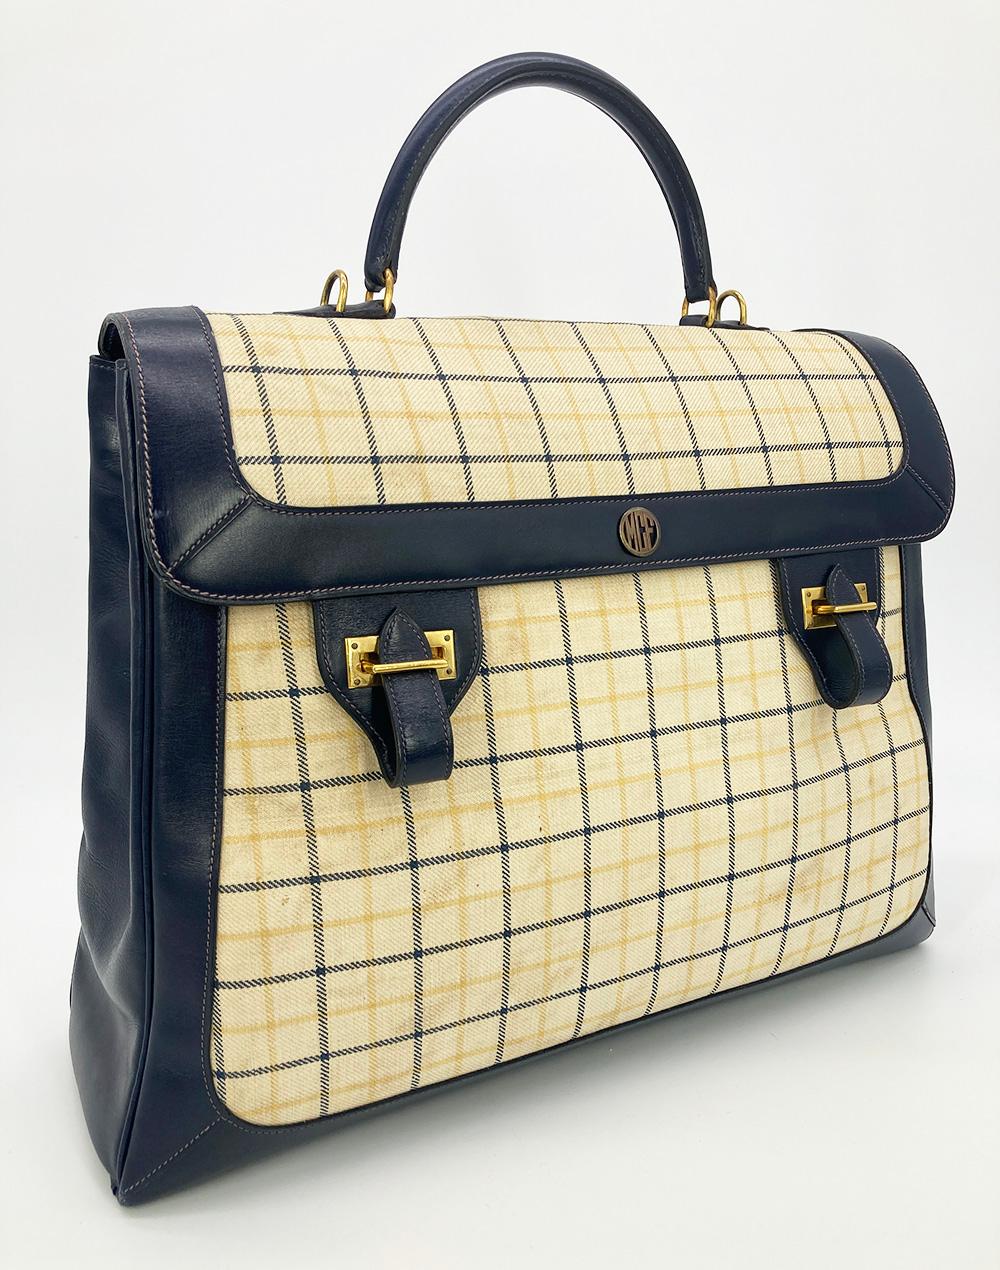 Women's Vintage Hermes Plaid Canvas and Navy Leather Briefcase Tote